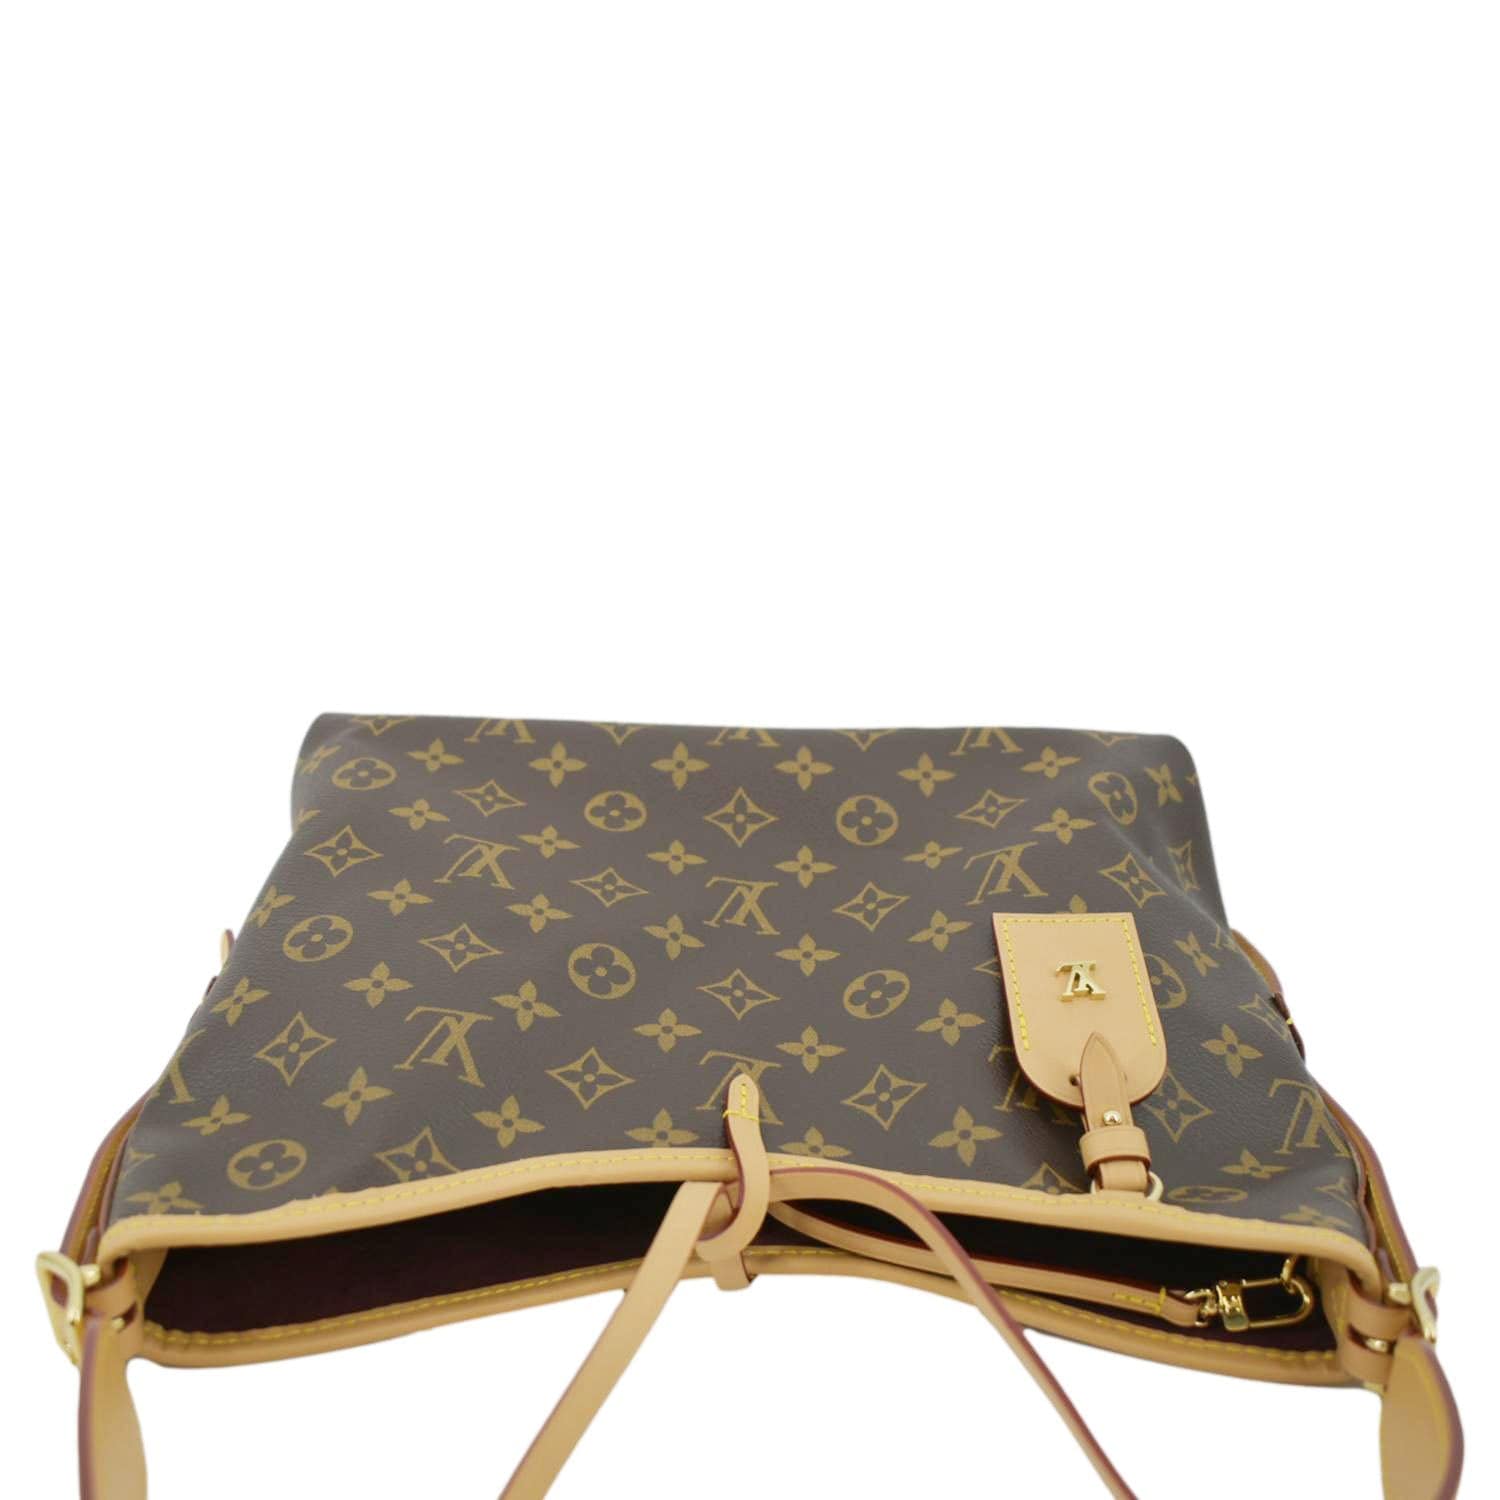 Louis Vuitton on X: Emblematic accents. Crafted with great